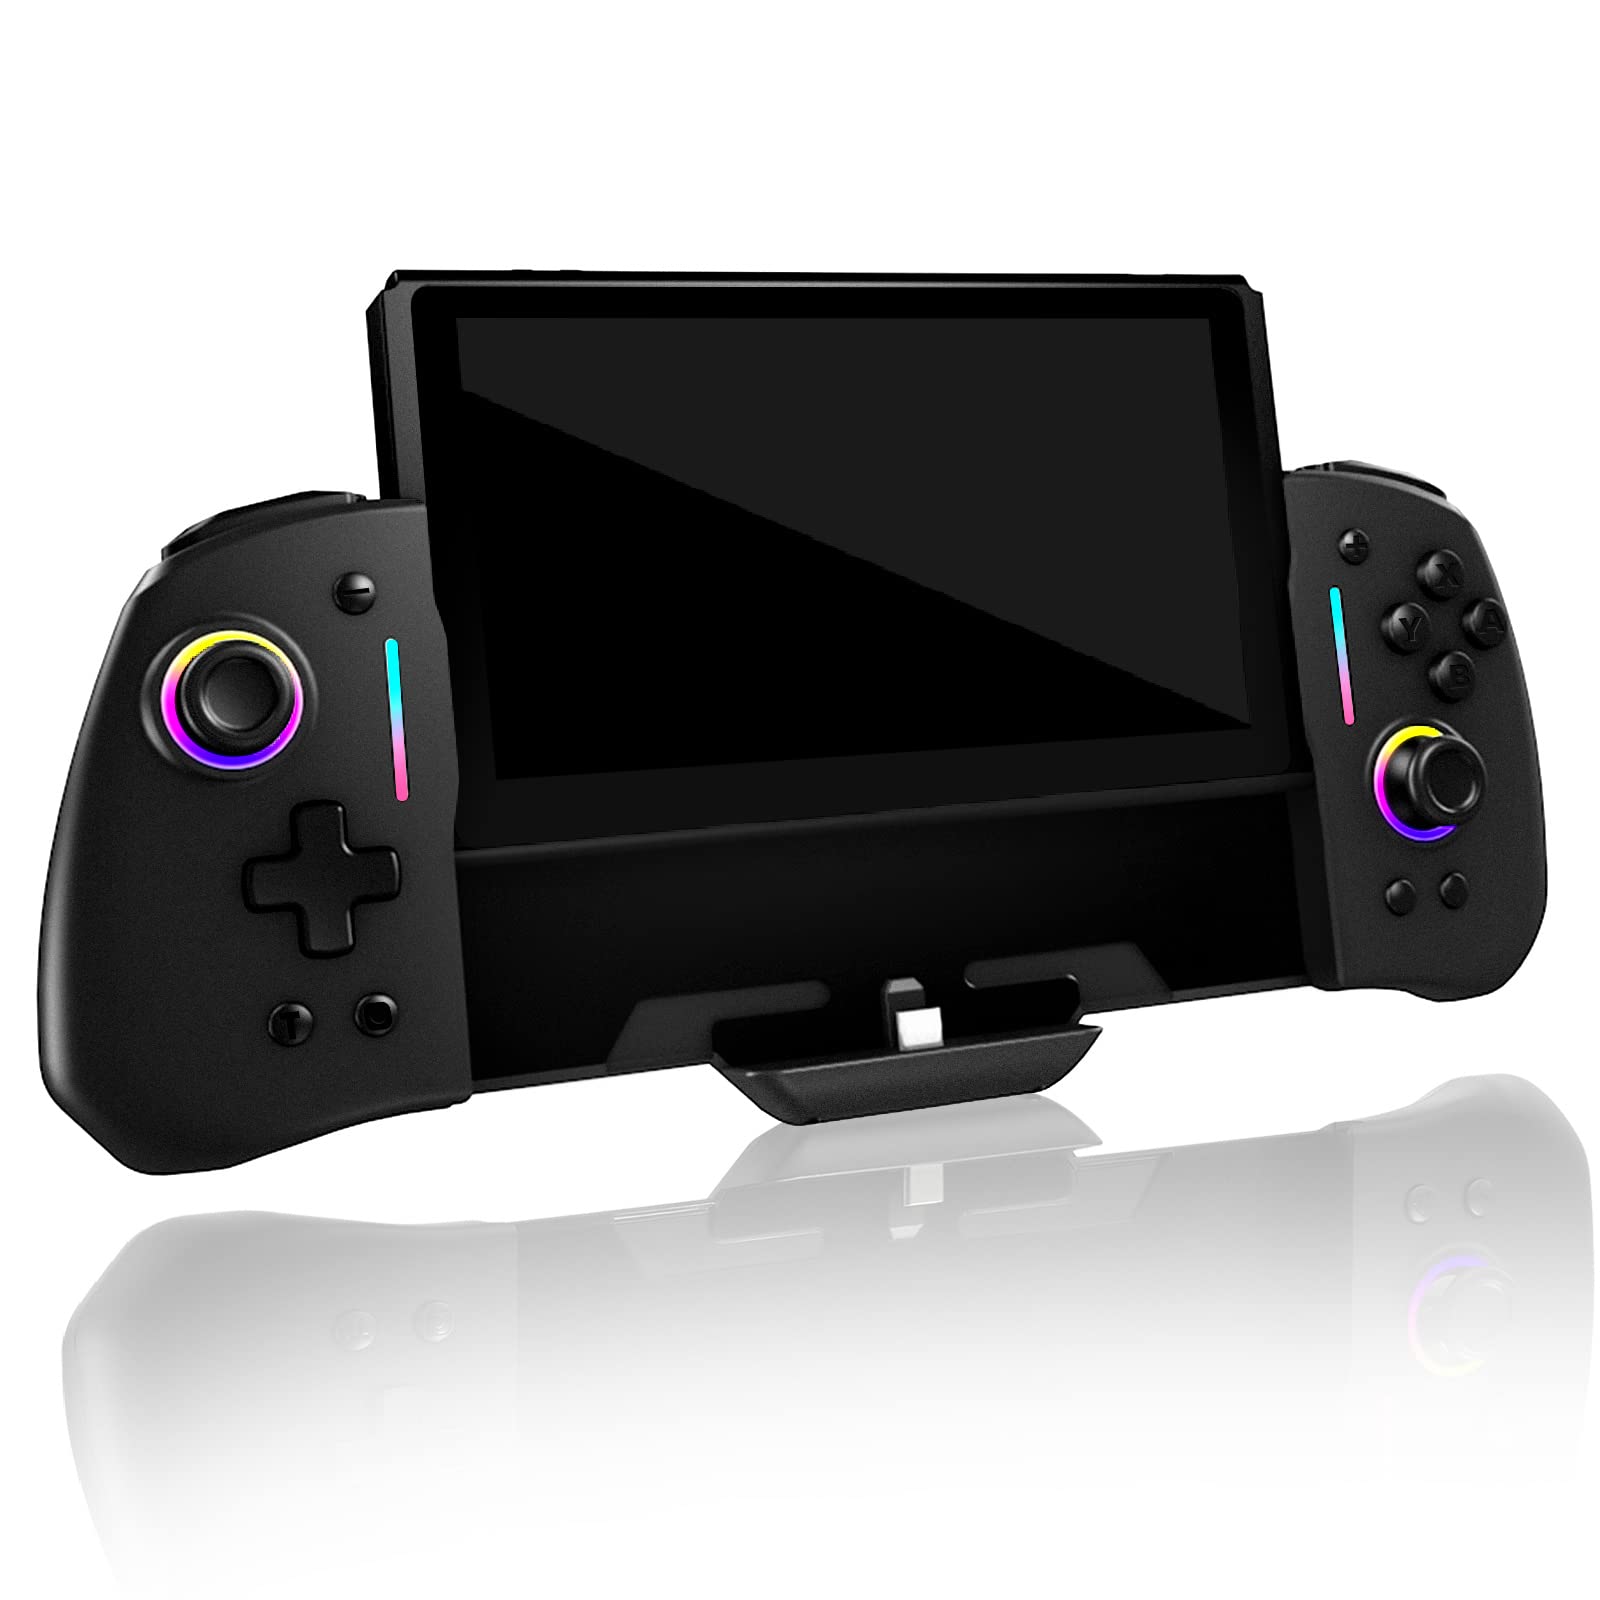 Hold the Sync button on the Joy-Con for a few seconds.
Release the button and press it again to sync it with the console.